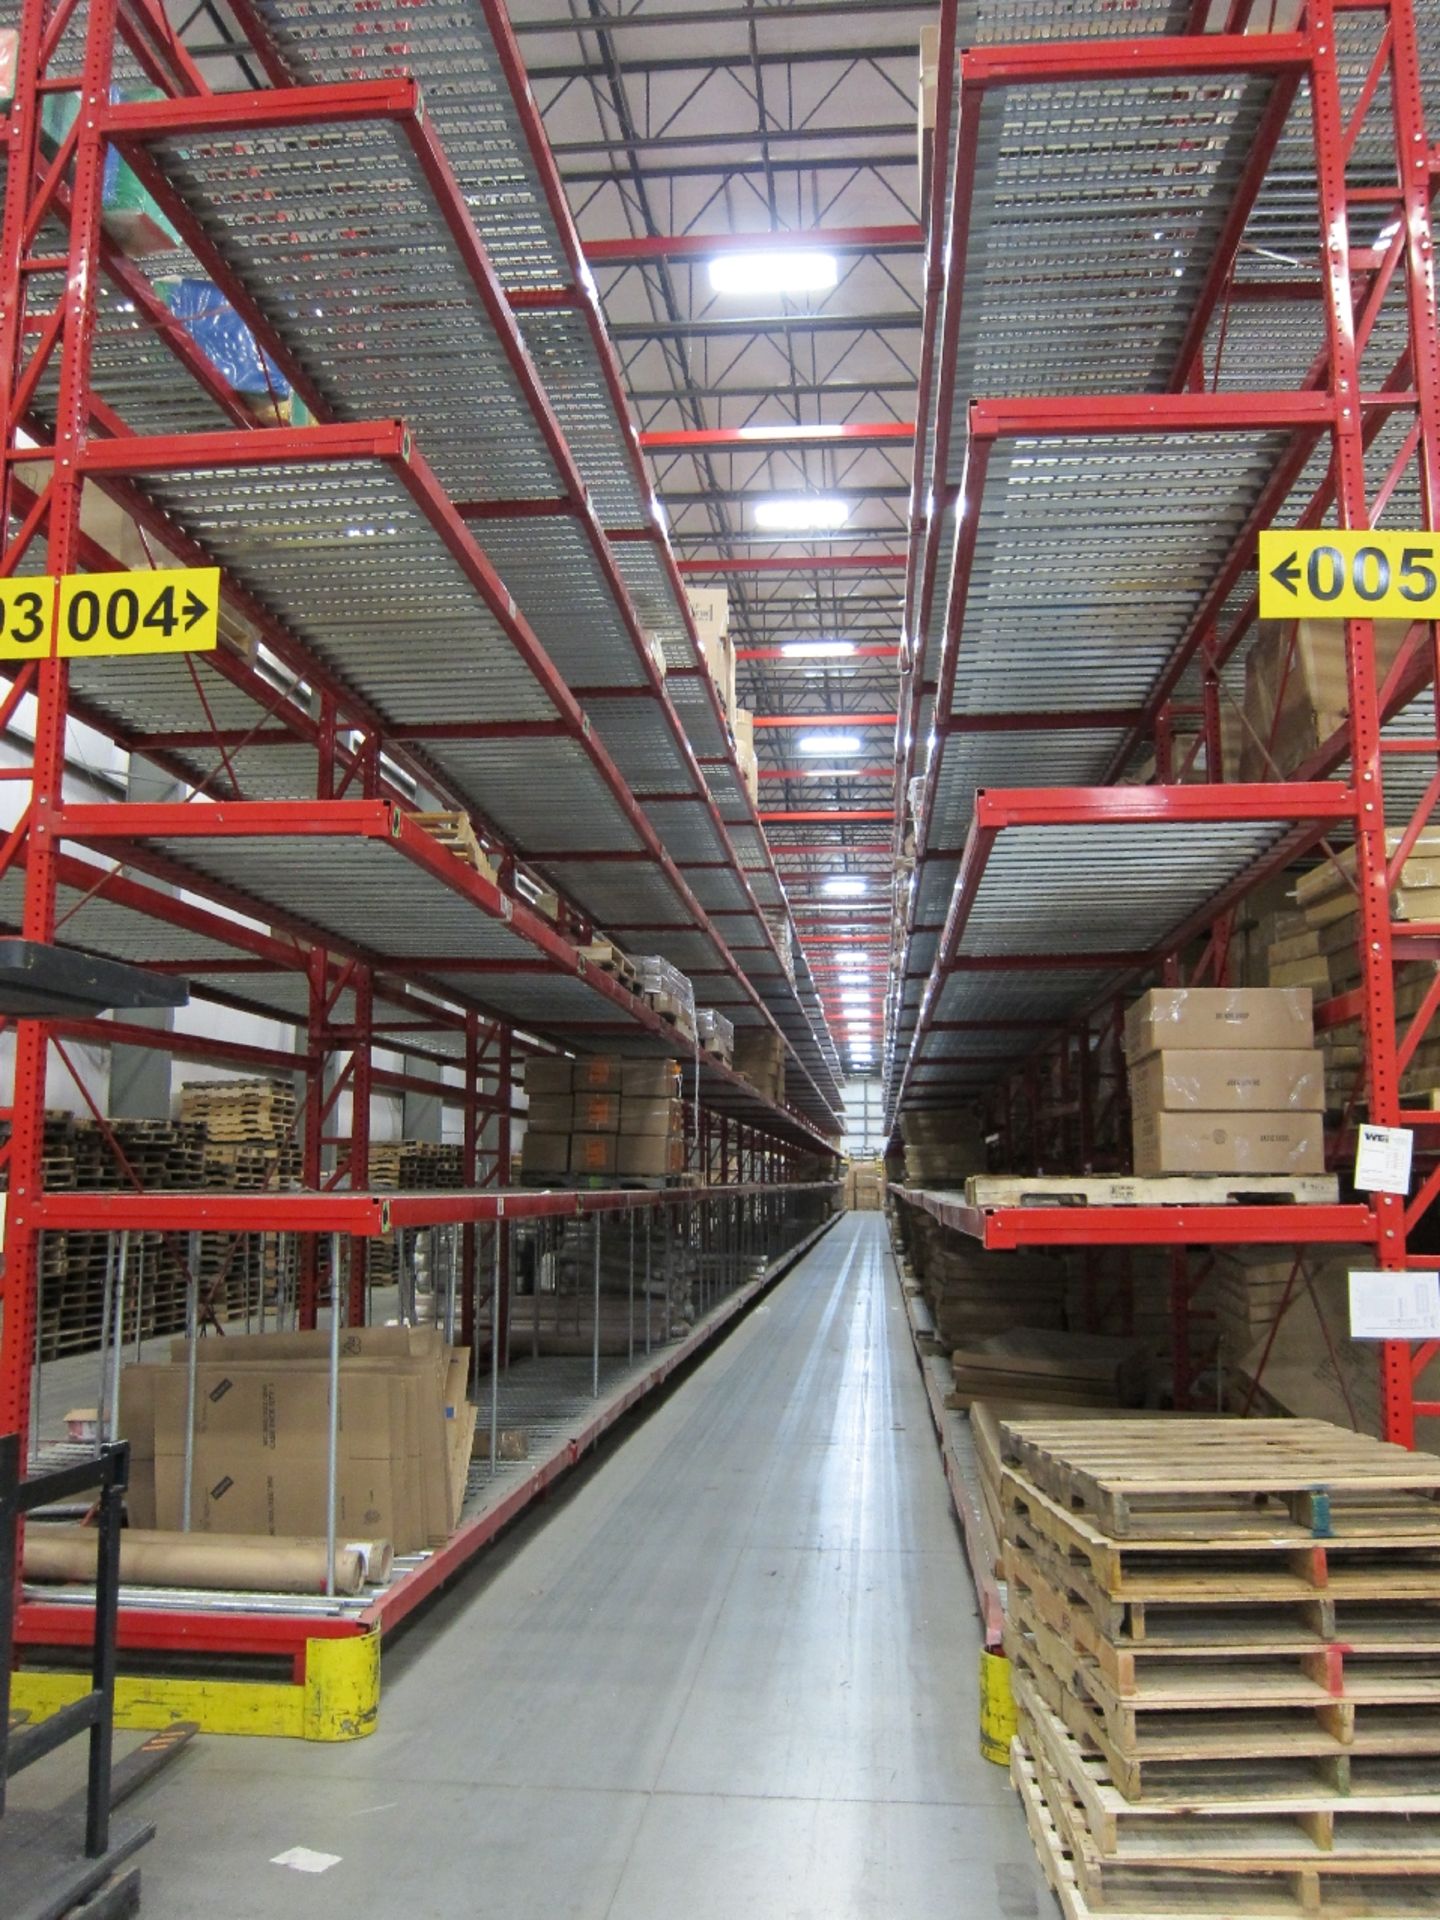 (X75) SECTIONS/BAYS OF KINGWAY TEARDROP STYLE CANTILEVER RACKING, 14" X 384" UPRIGHTS, 48" ARMS